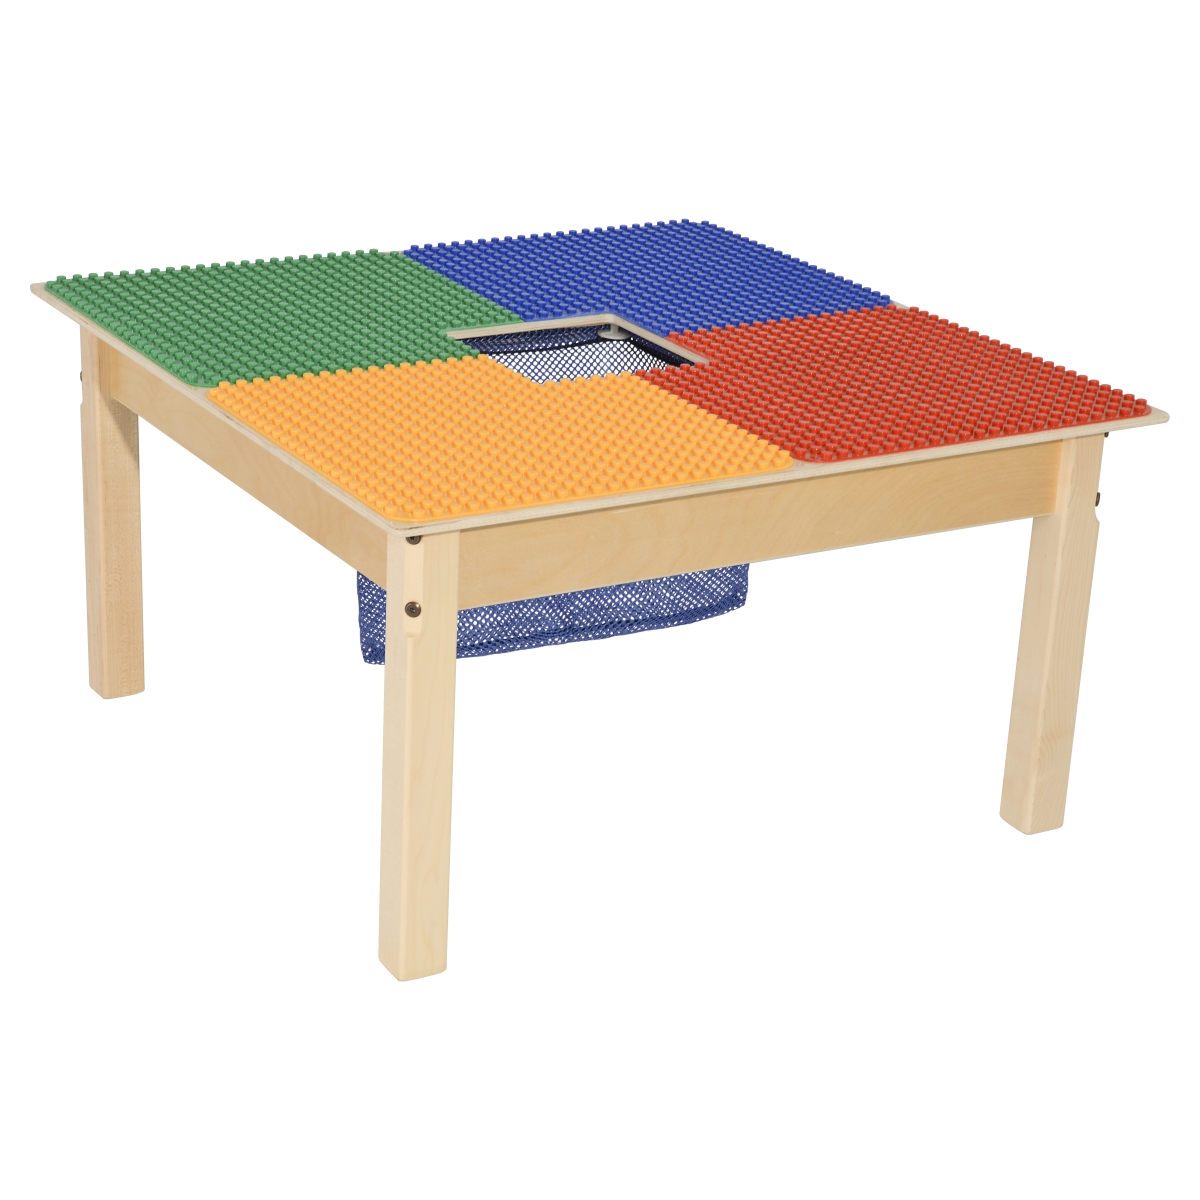 Tp3131pgn14 14 In. Duplo Compatible Square Table With Legs, Multi Color